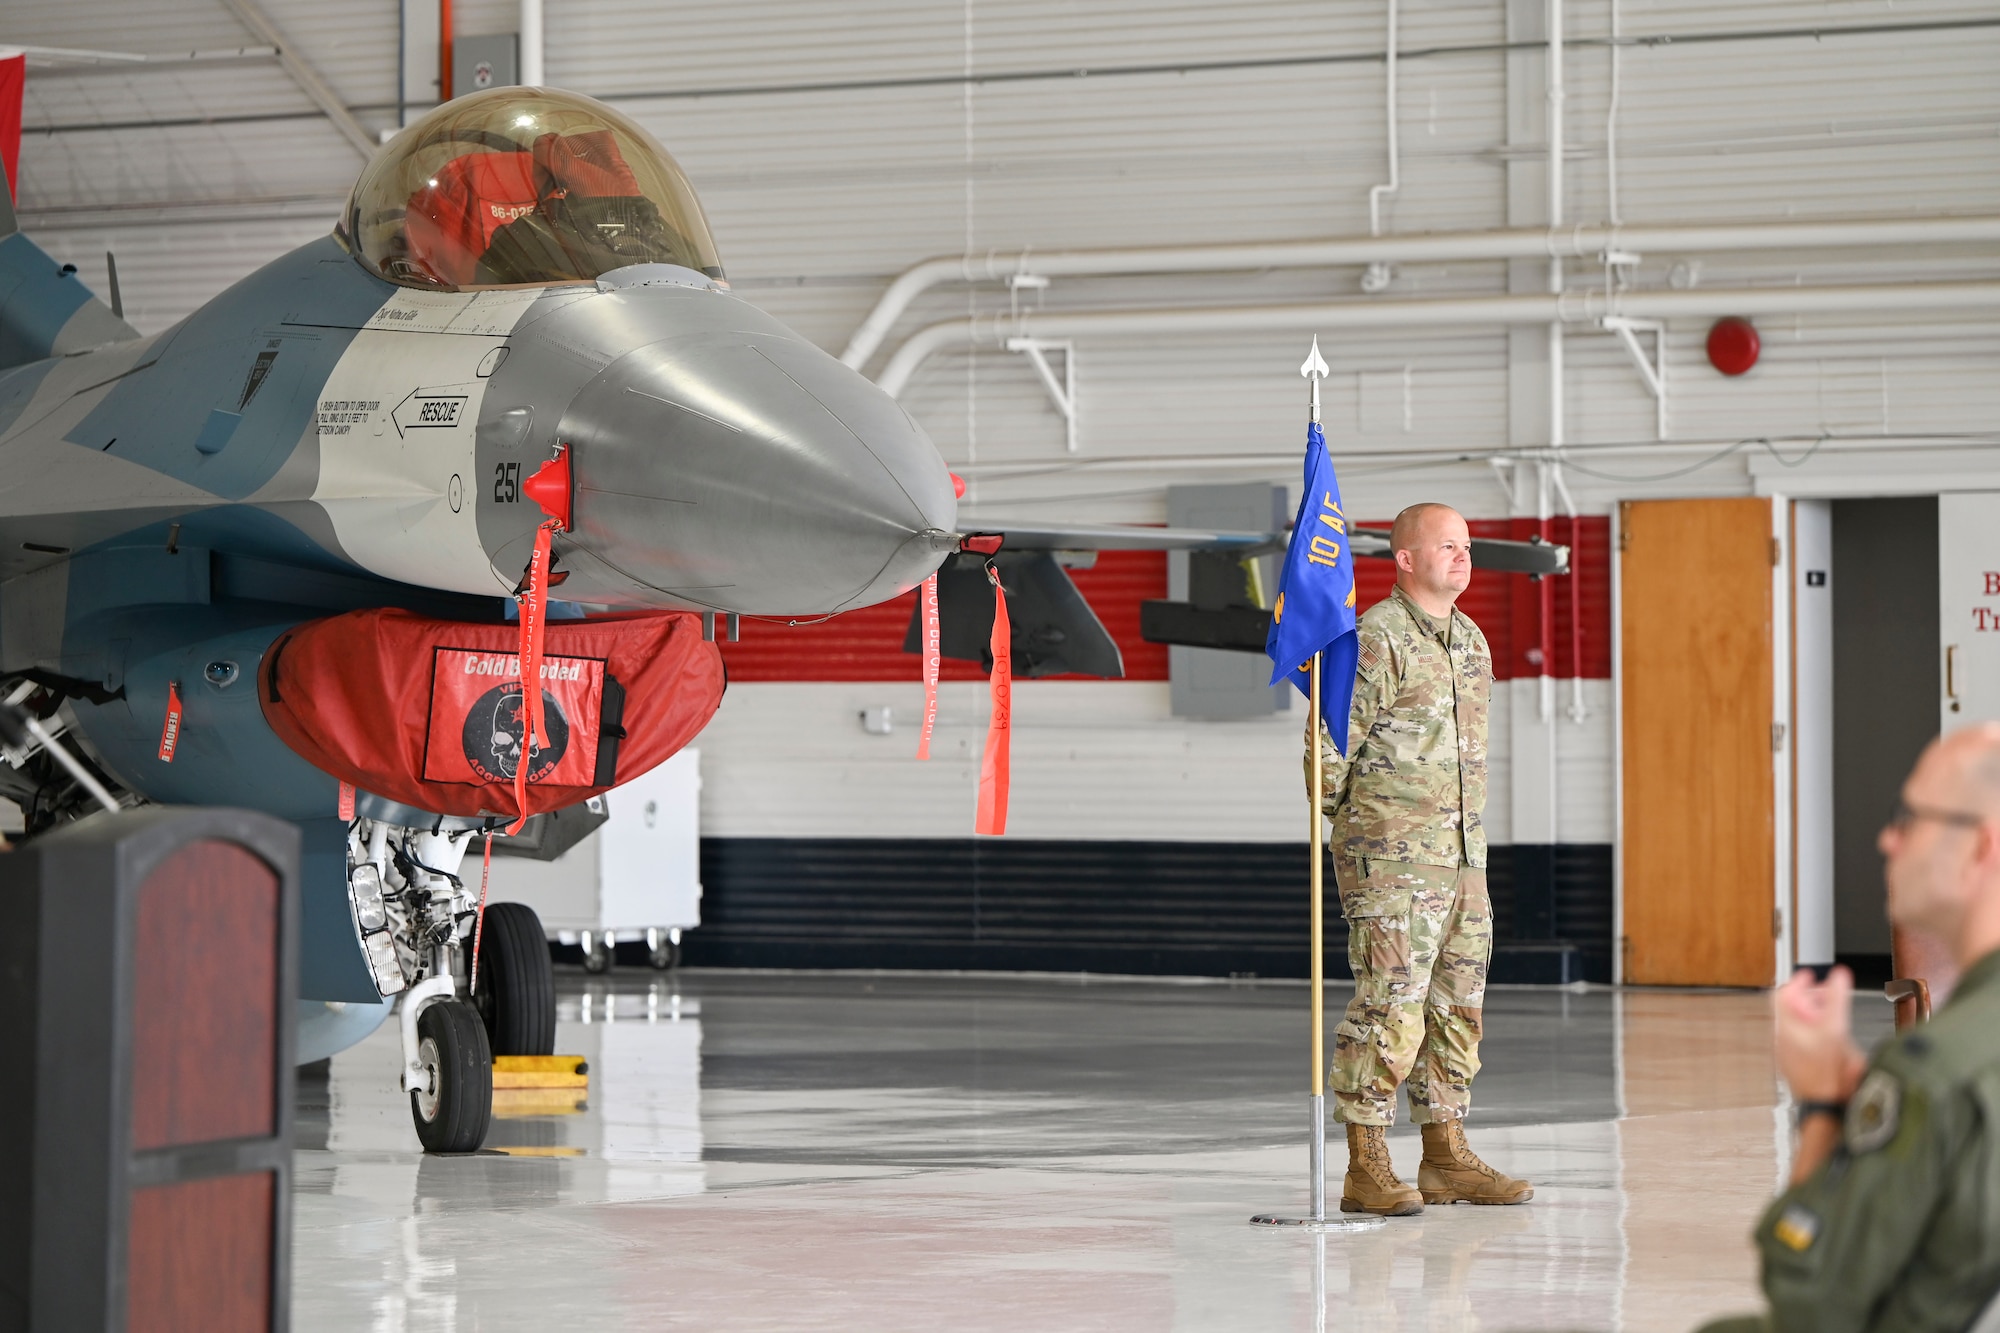 An airman holds a flag during a ceremony where an F-16 Falcon is the backdrop.